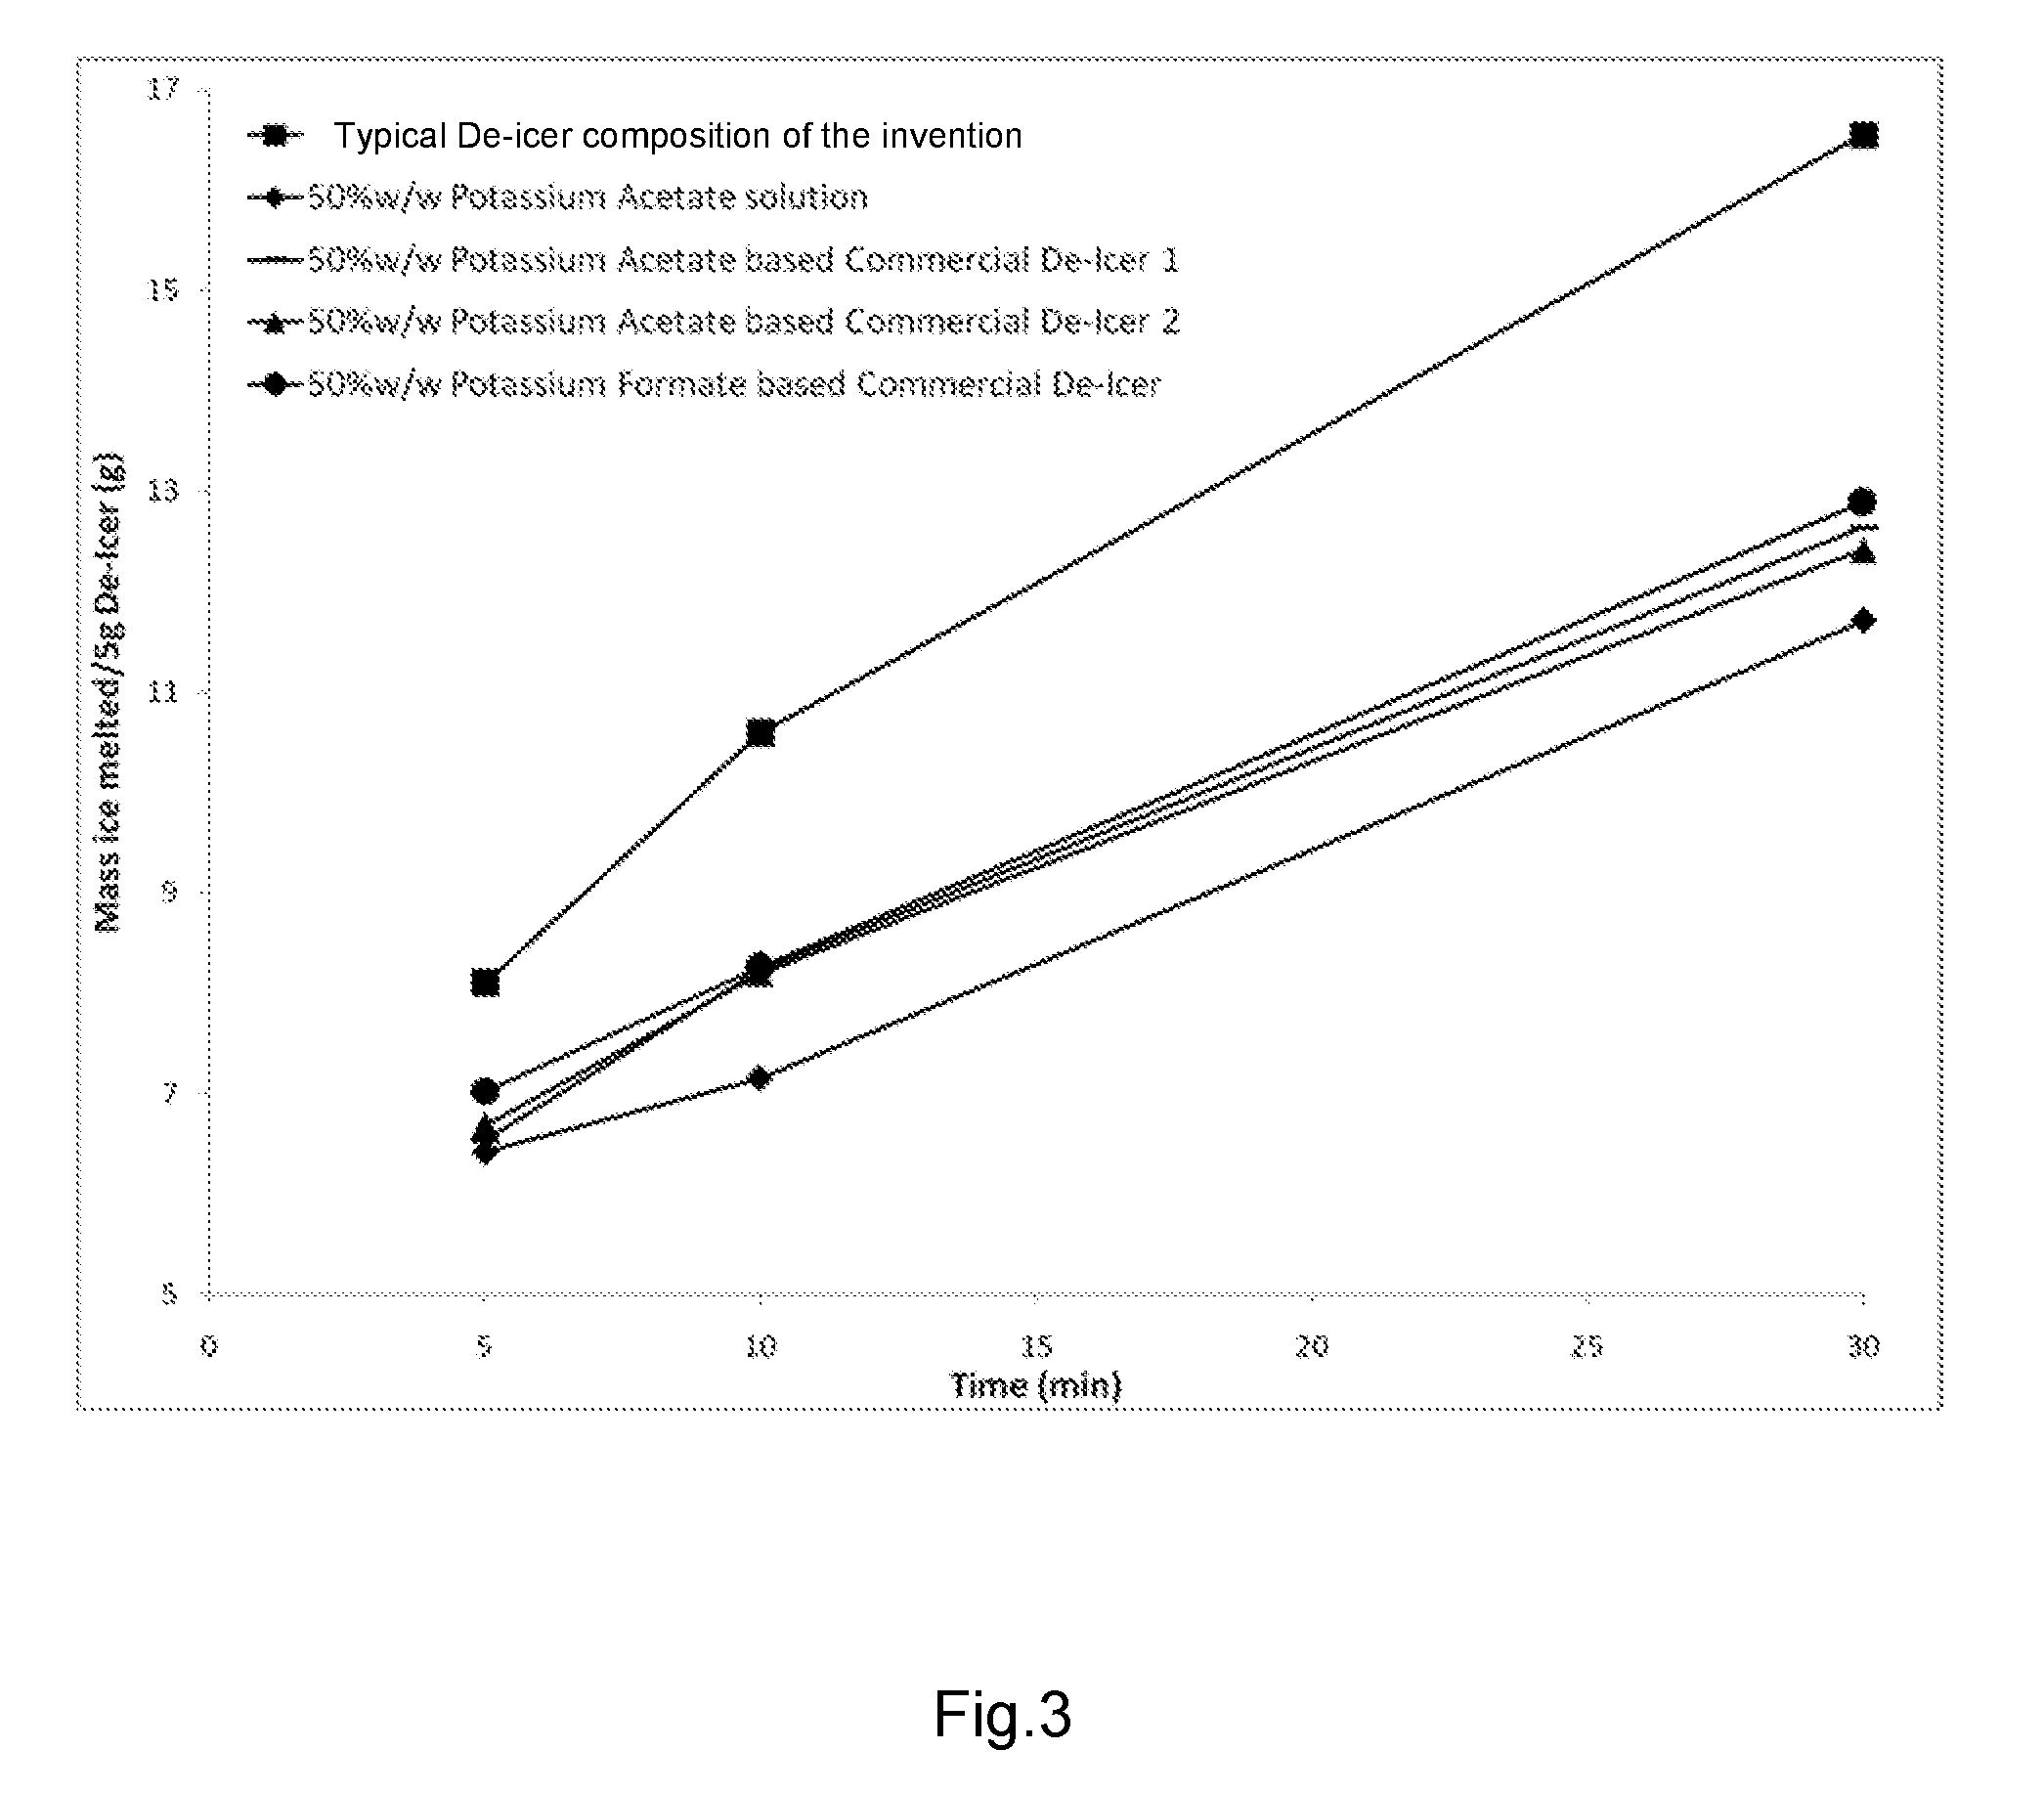 De-icer and/or anti-icer compositions and methods